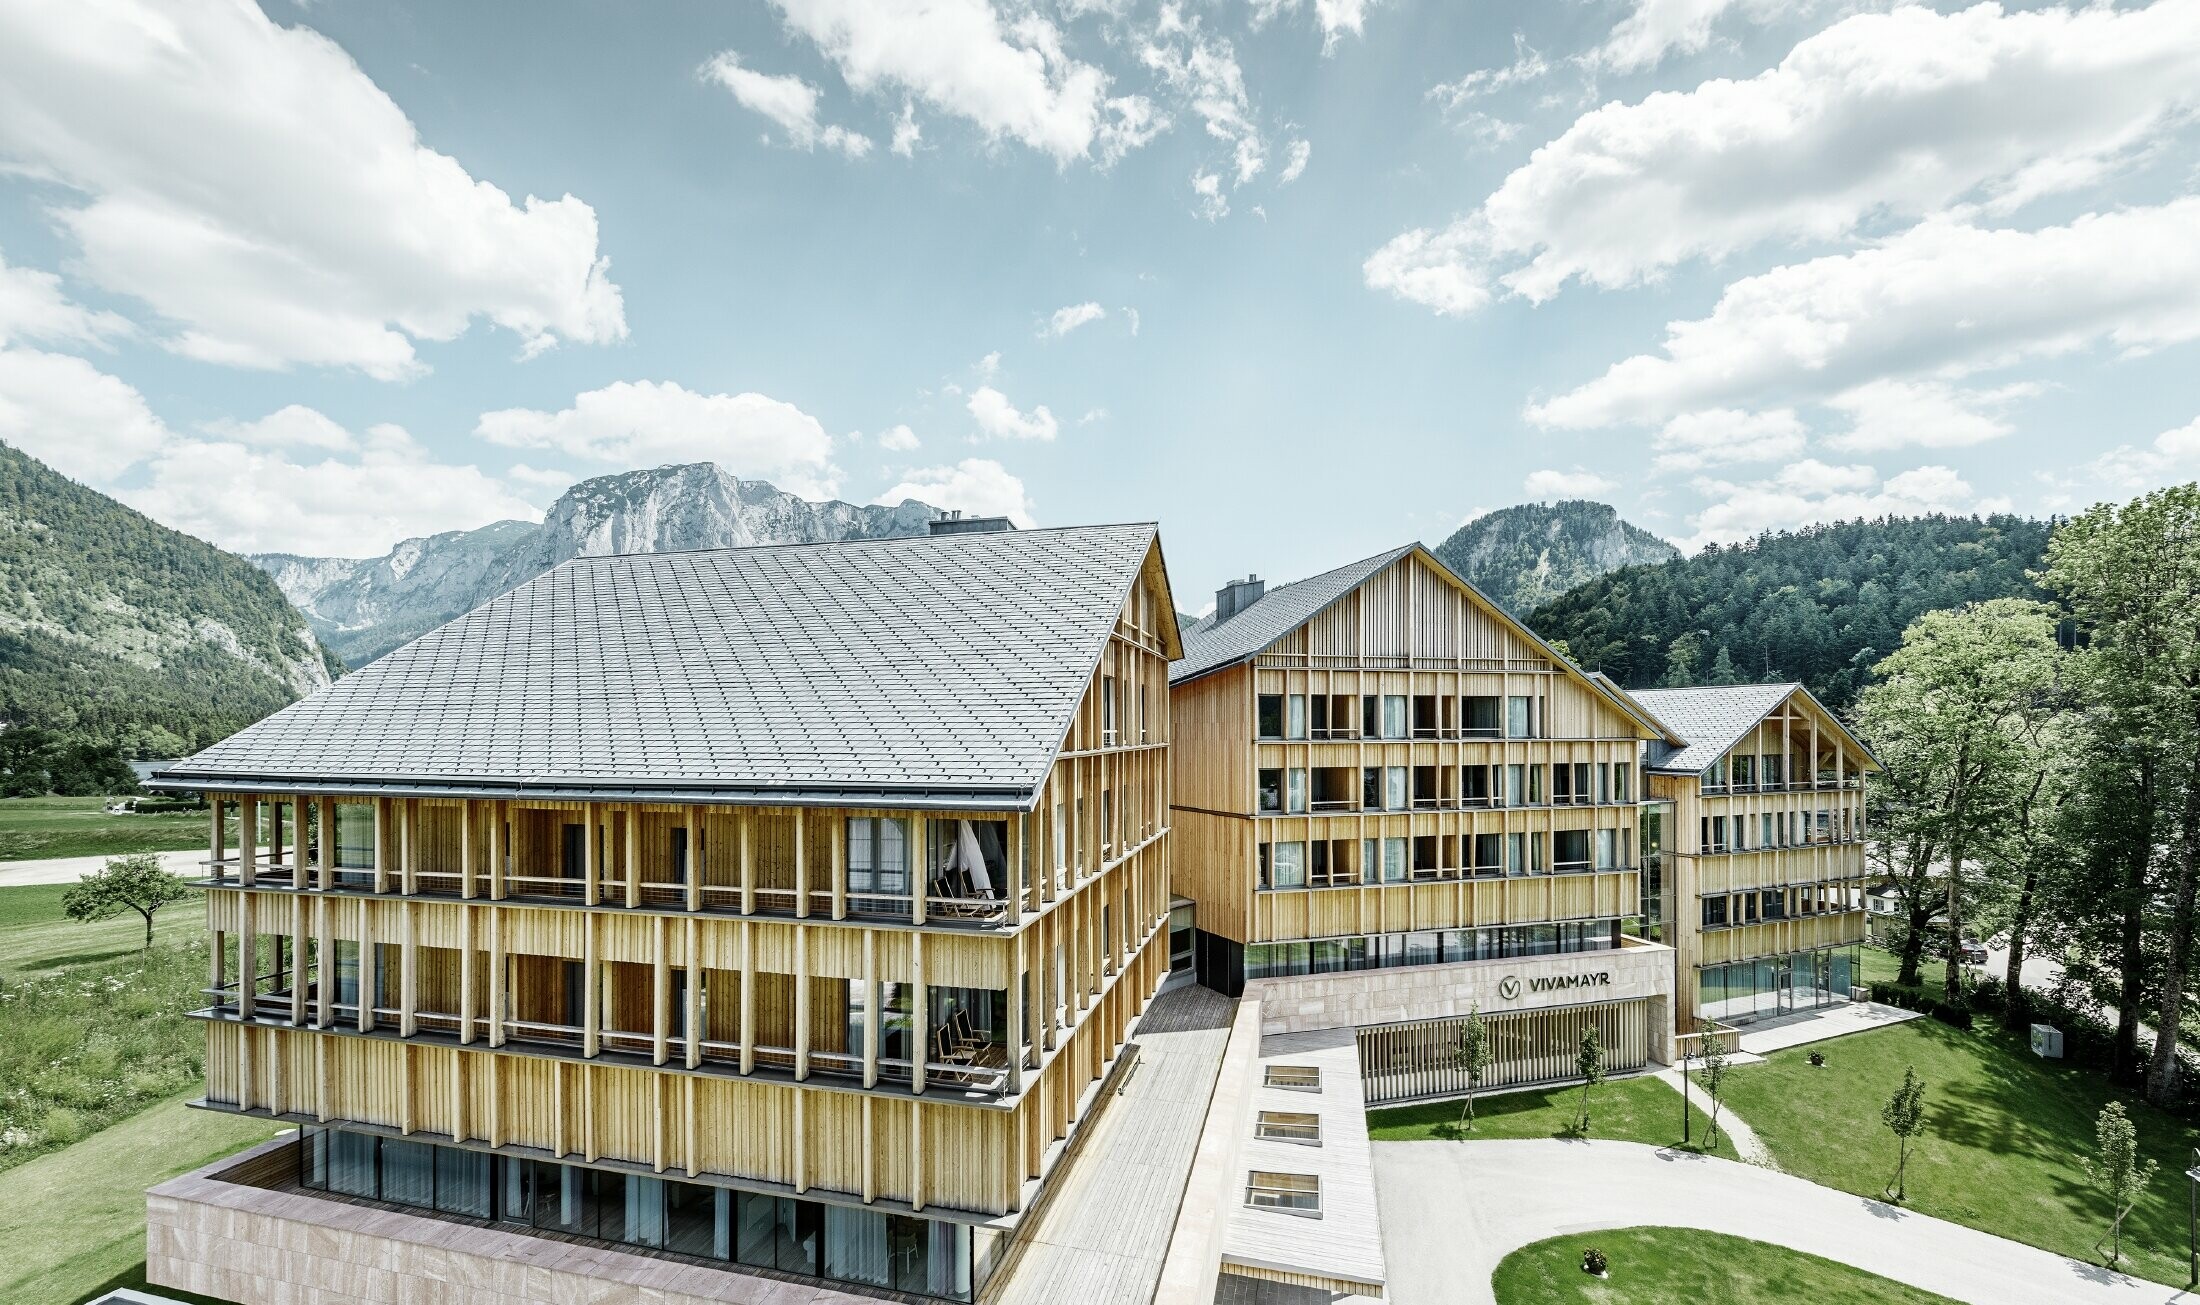 Hotel Vivamayr in Altaussee with wooden façade and PREFA roof with roof shingles